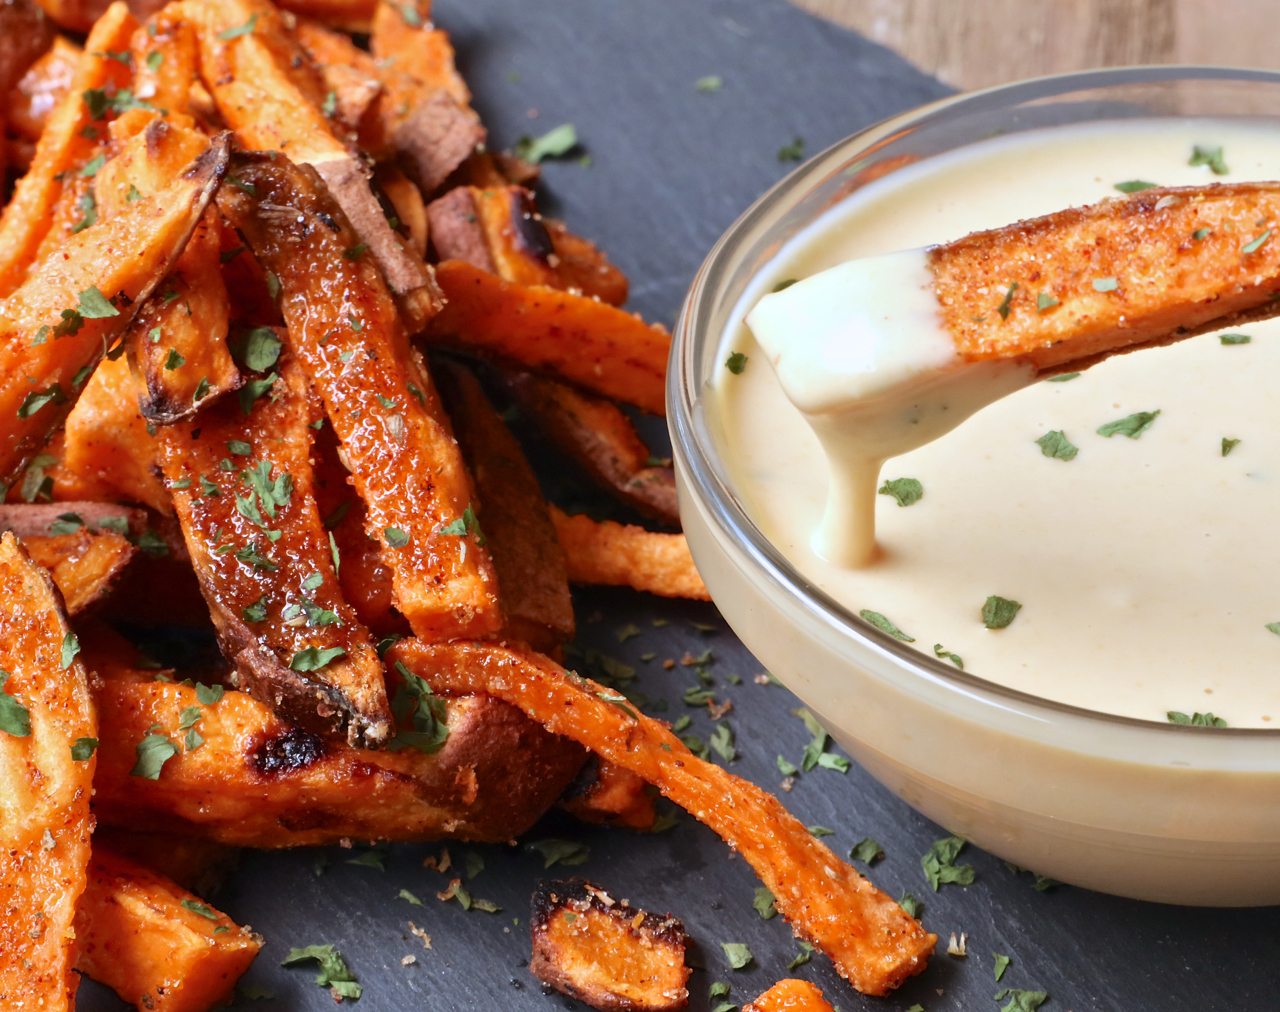 You see..it’s taken me a long time to find a sweet potato fry recipe that b...